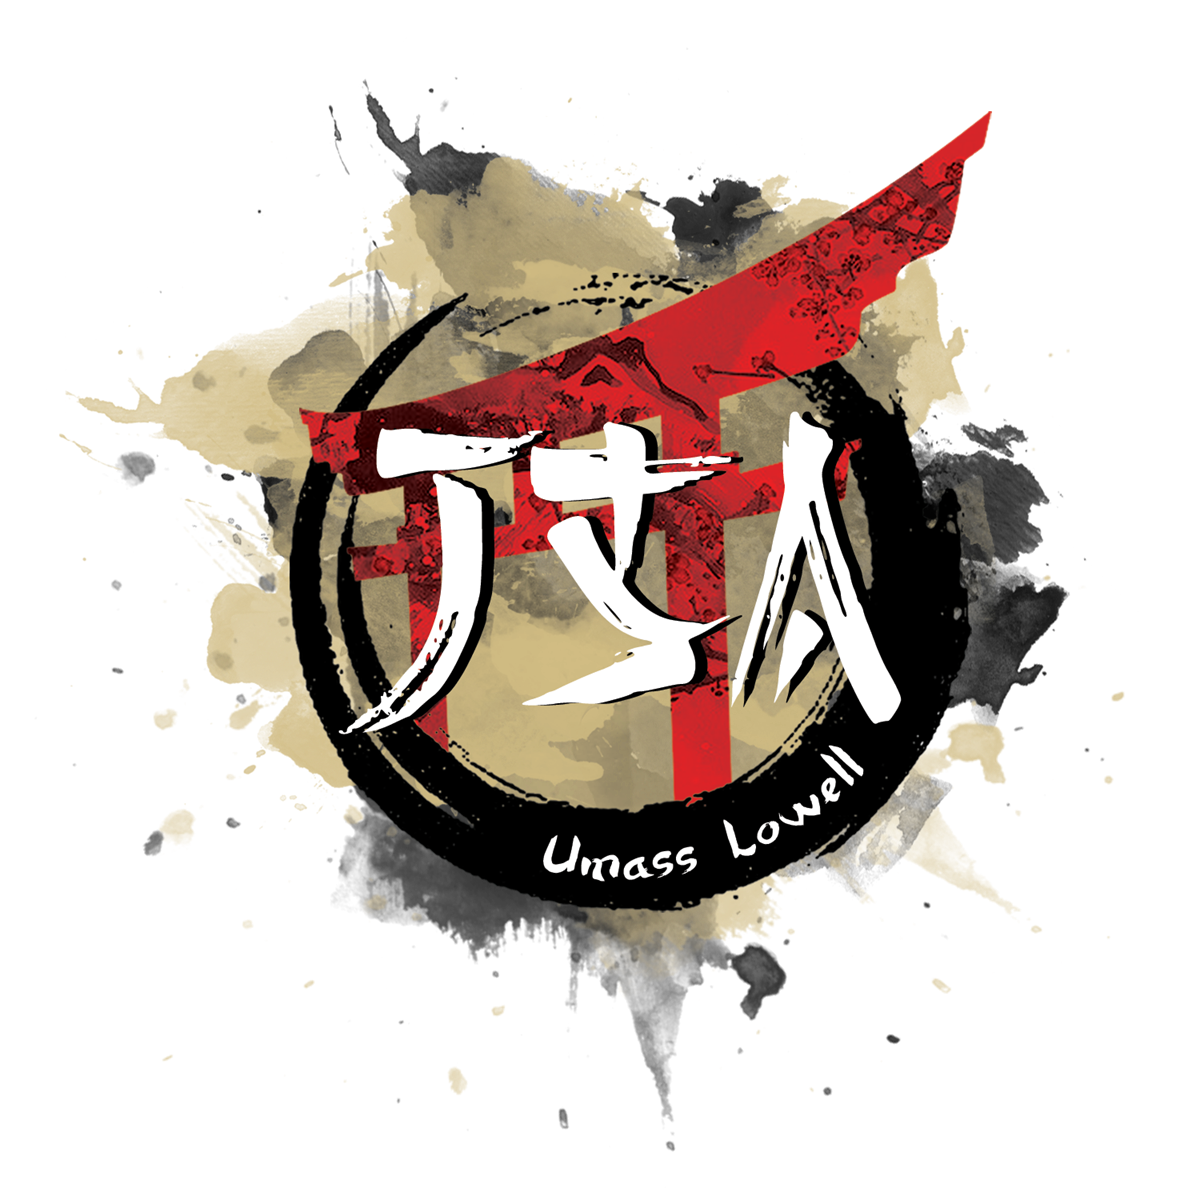 Logo: JSA (Japanese Student Association) white letters made by brush strokes, background: a splash of tan and black paint with a Torii  